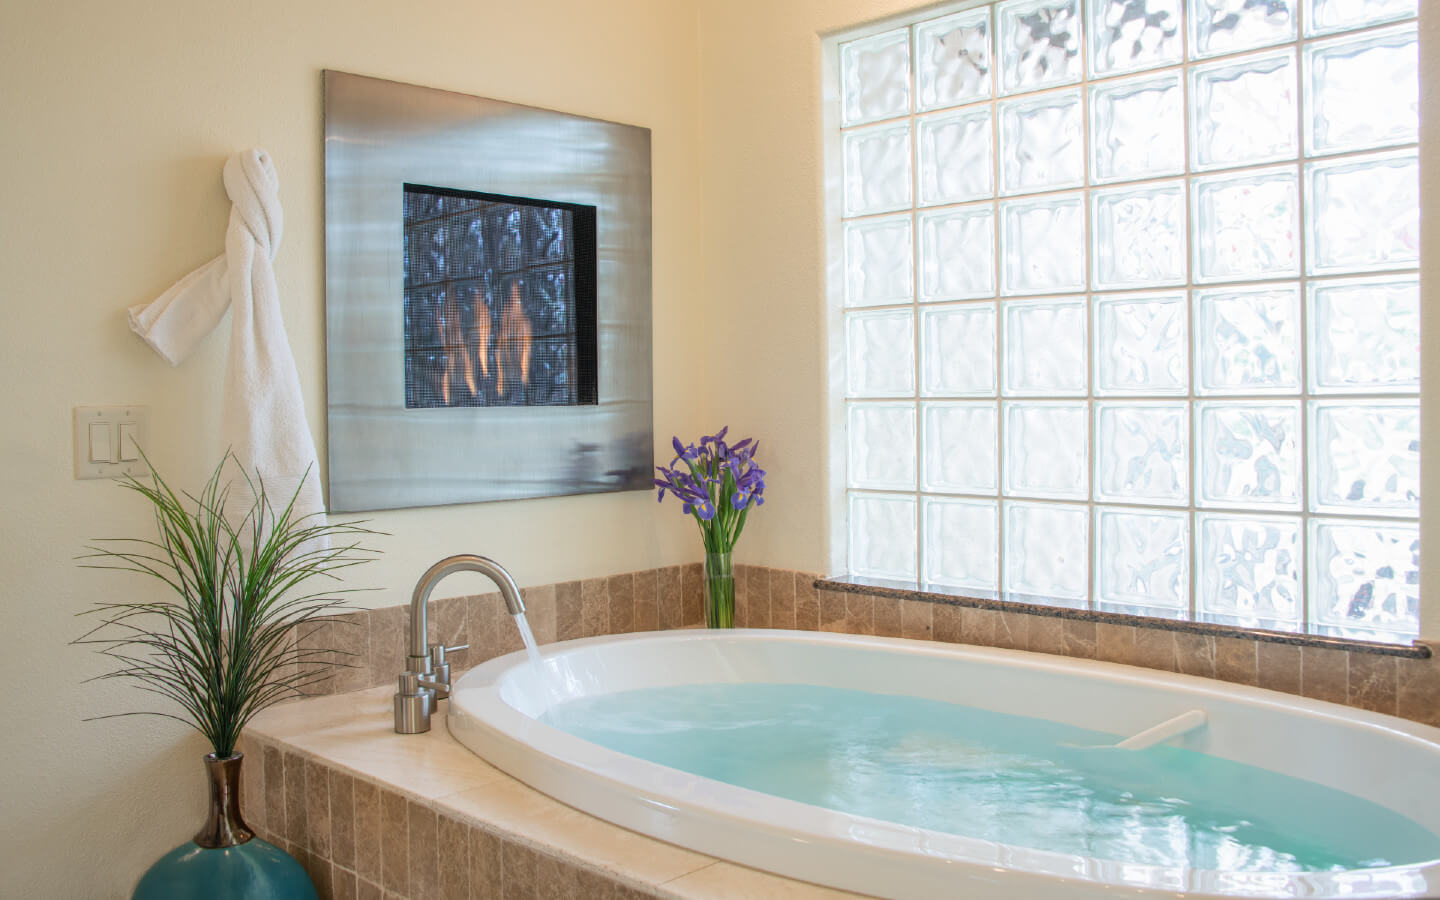 Framed fireplace recessed into wall above jetted tub filled with water, underneath cloudy opaque glass block window. Flowers decorate the tub area.